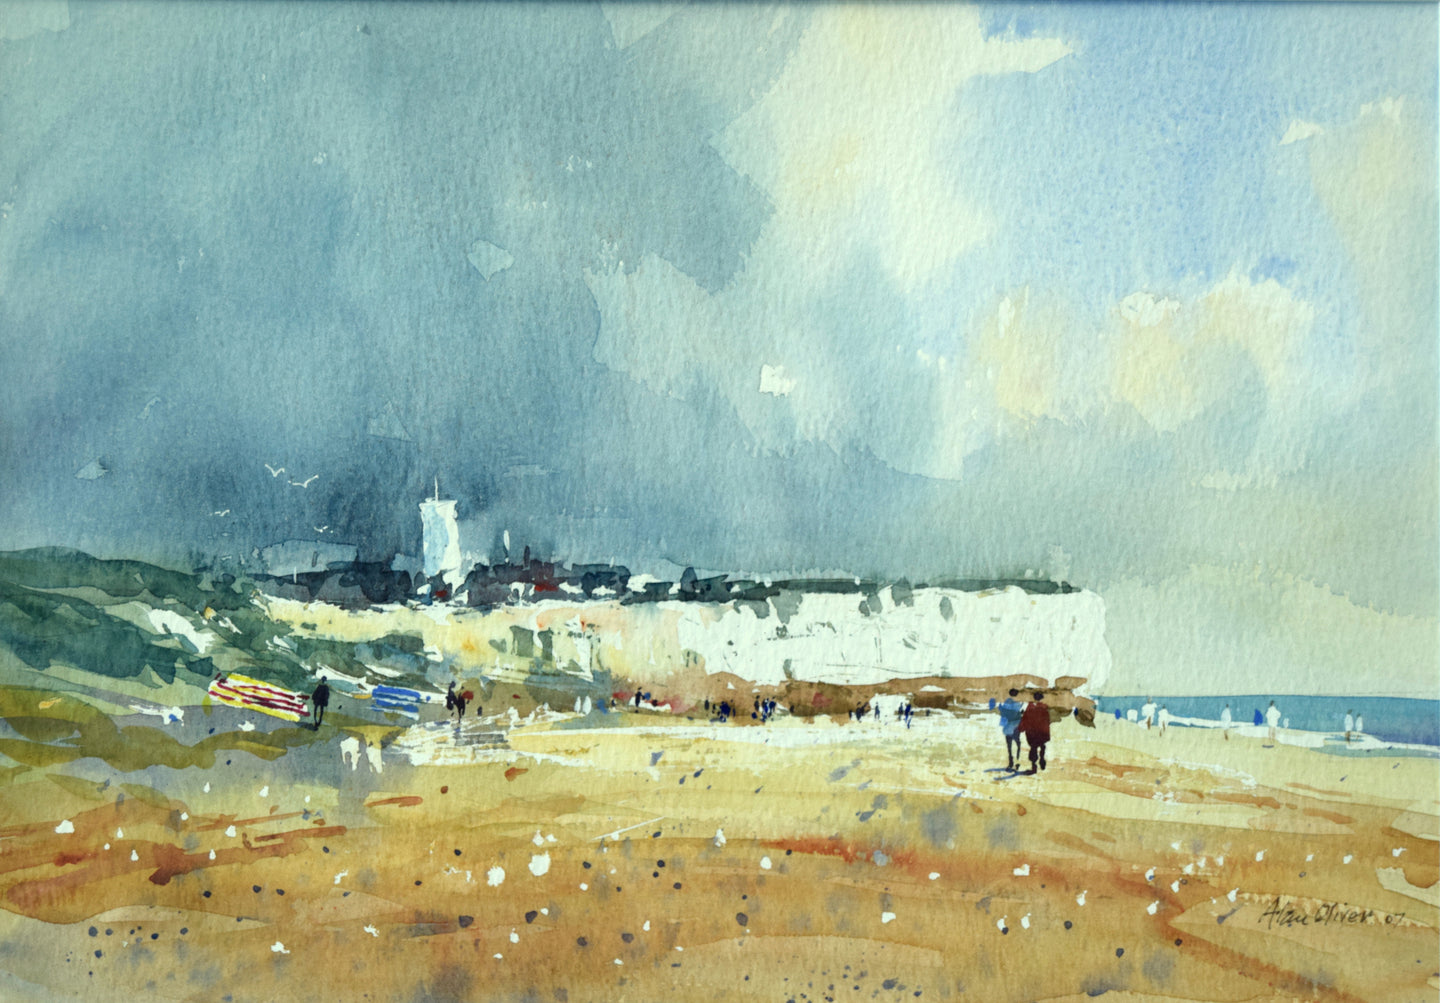 9.5 x 14 inch watercolour of the chalk cliffs at Hunstanton, set against a dark, moody sky taking up two thirds of the picture plane, with several figures on the beach, with some splattering conveying beach detritus. .